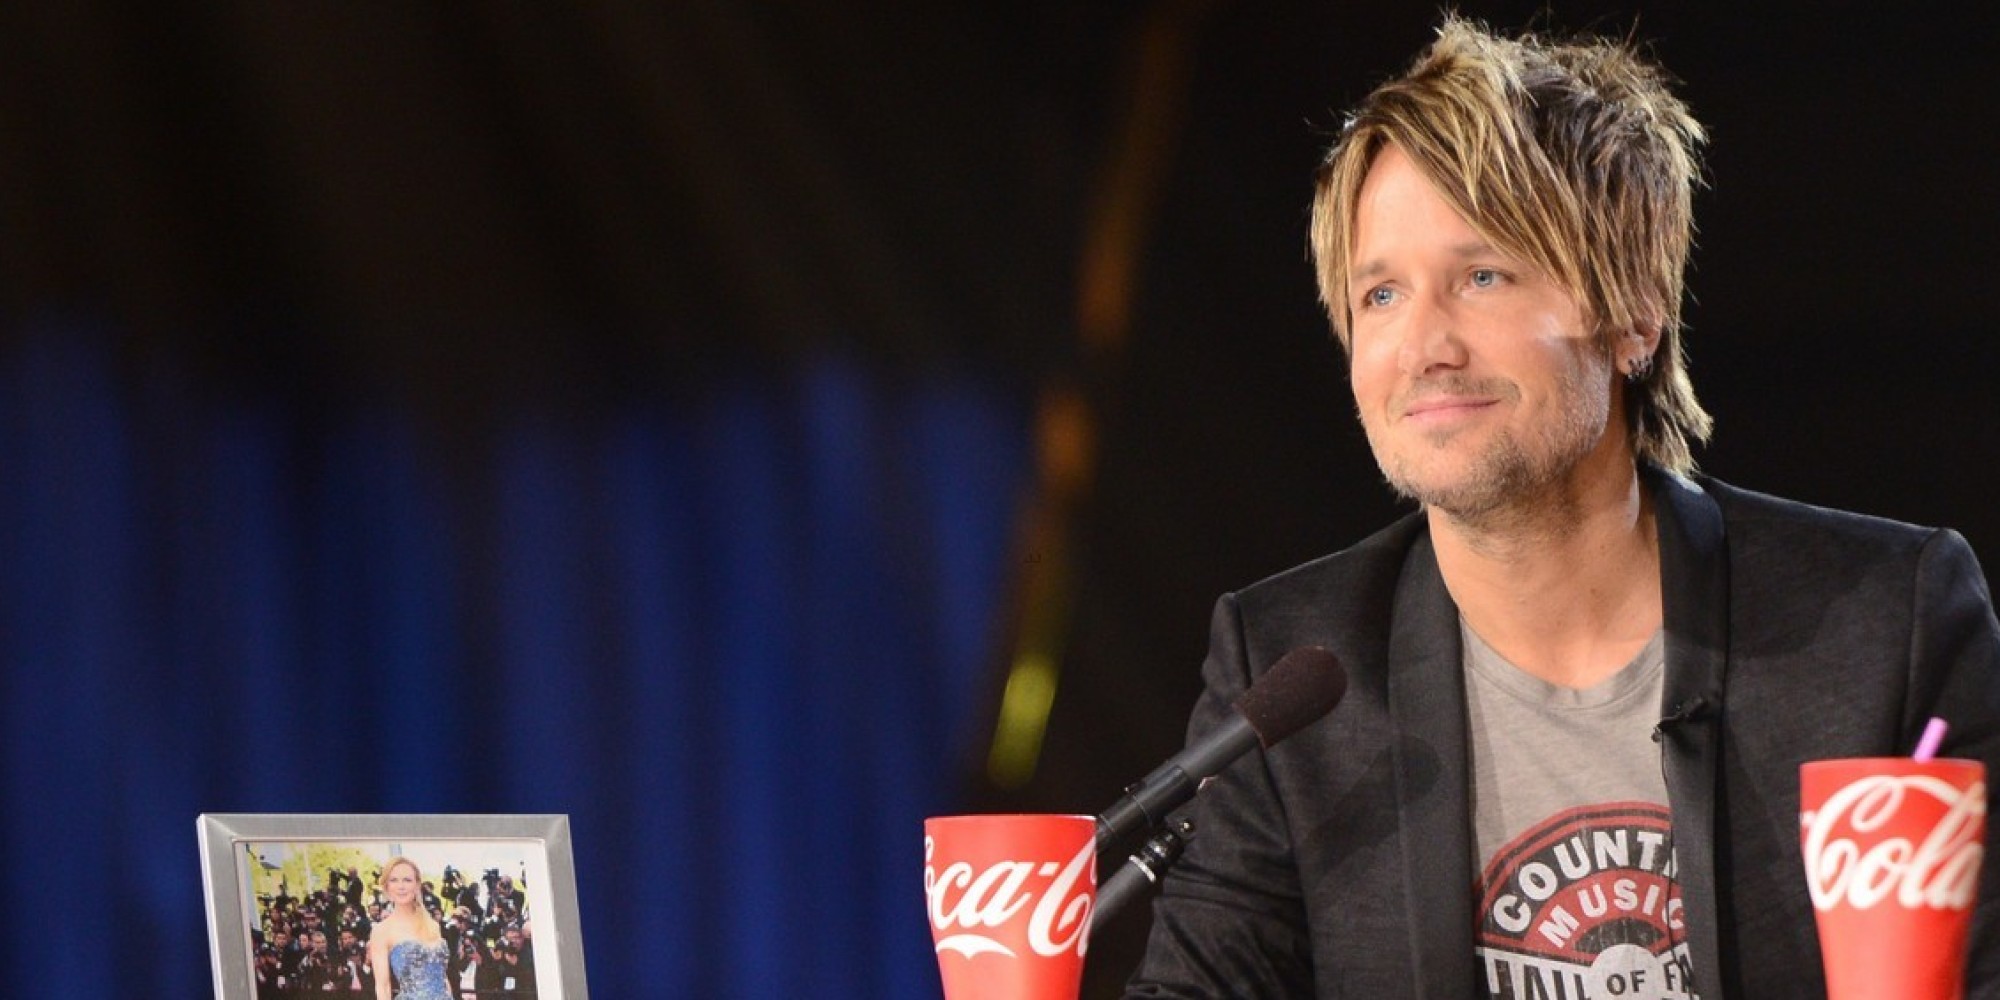 Keith Urban Gets Candid About His Relationship With Nicole Kidman On 'Idol'2000 x 1000